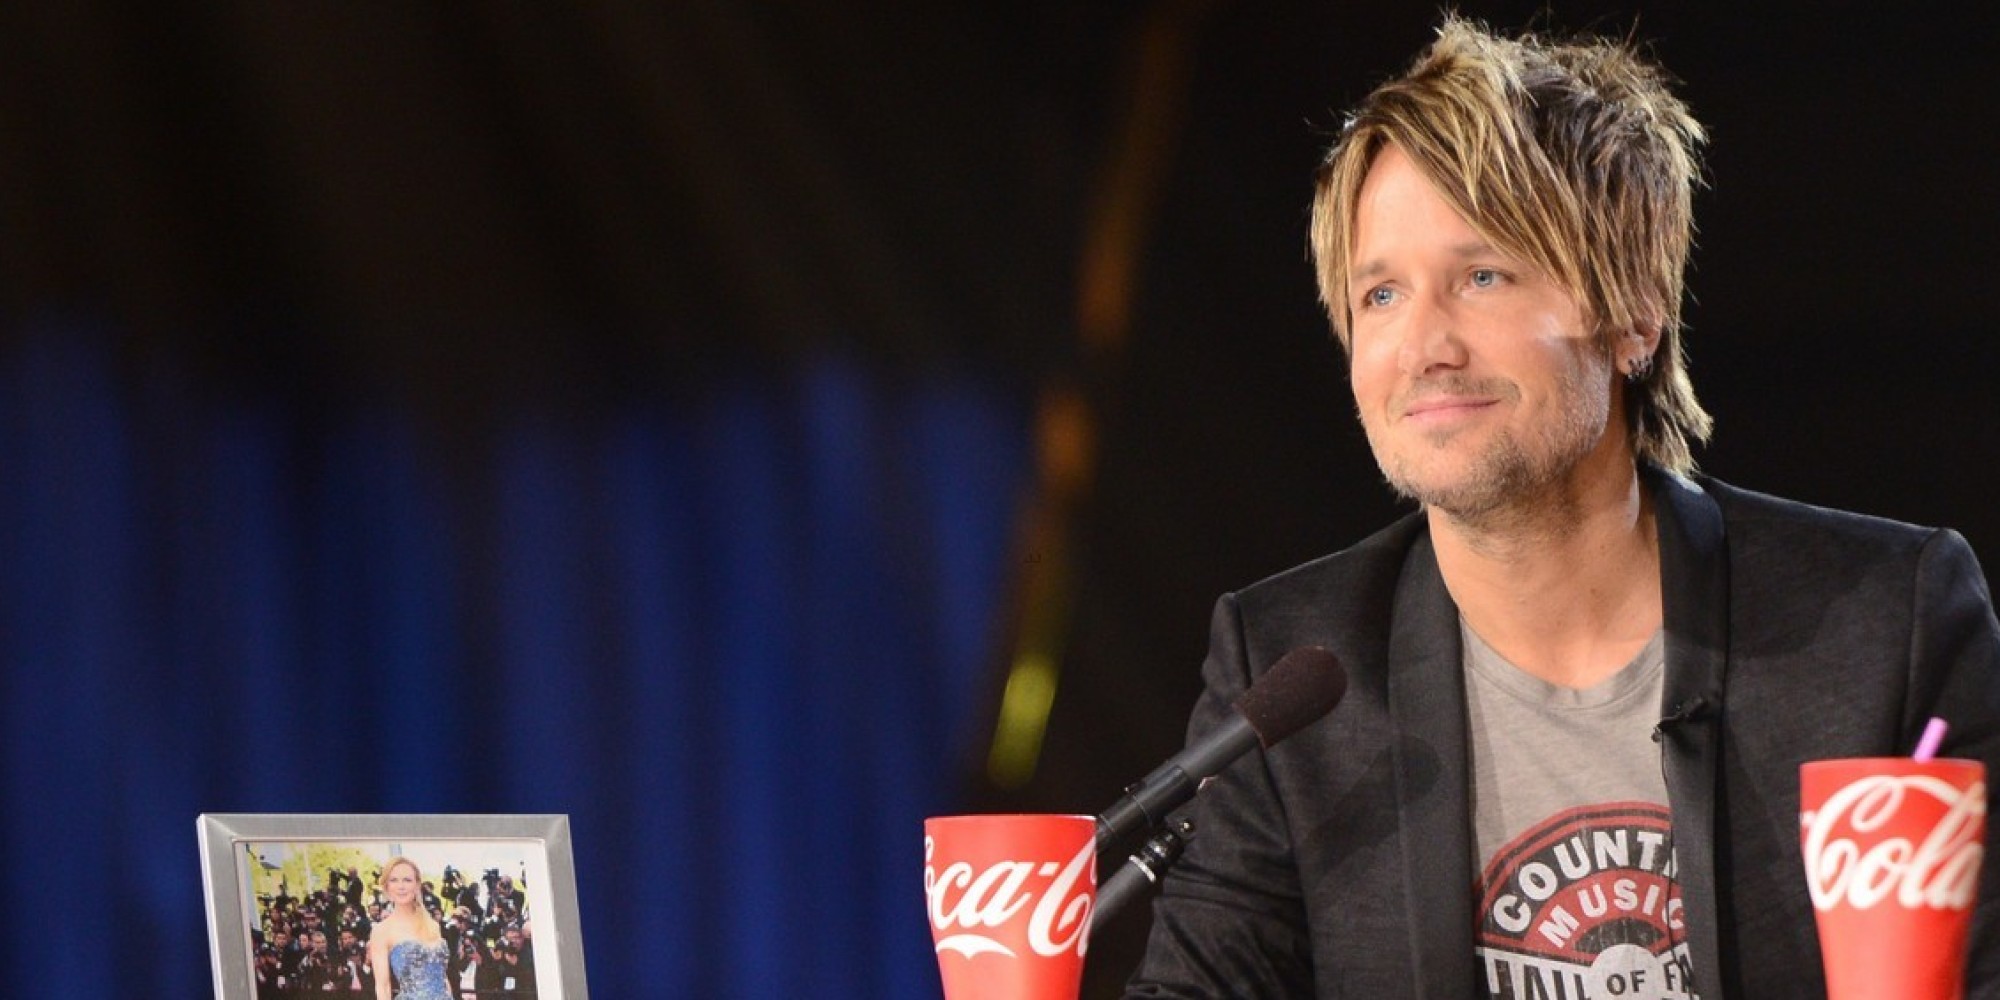 Keith Urban Gets Candid About His Relationship With Nicole Kidman On 'Idol'2000 x 1000